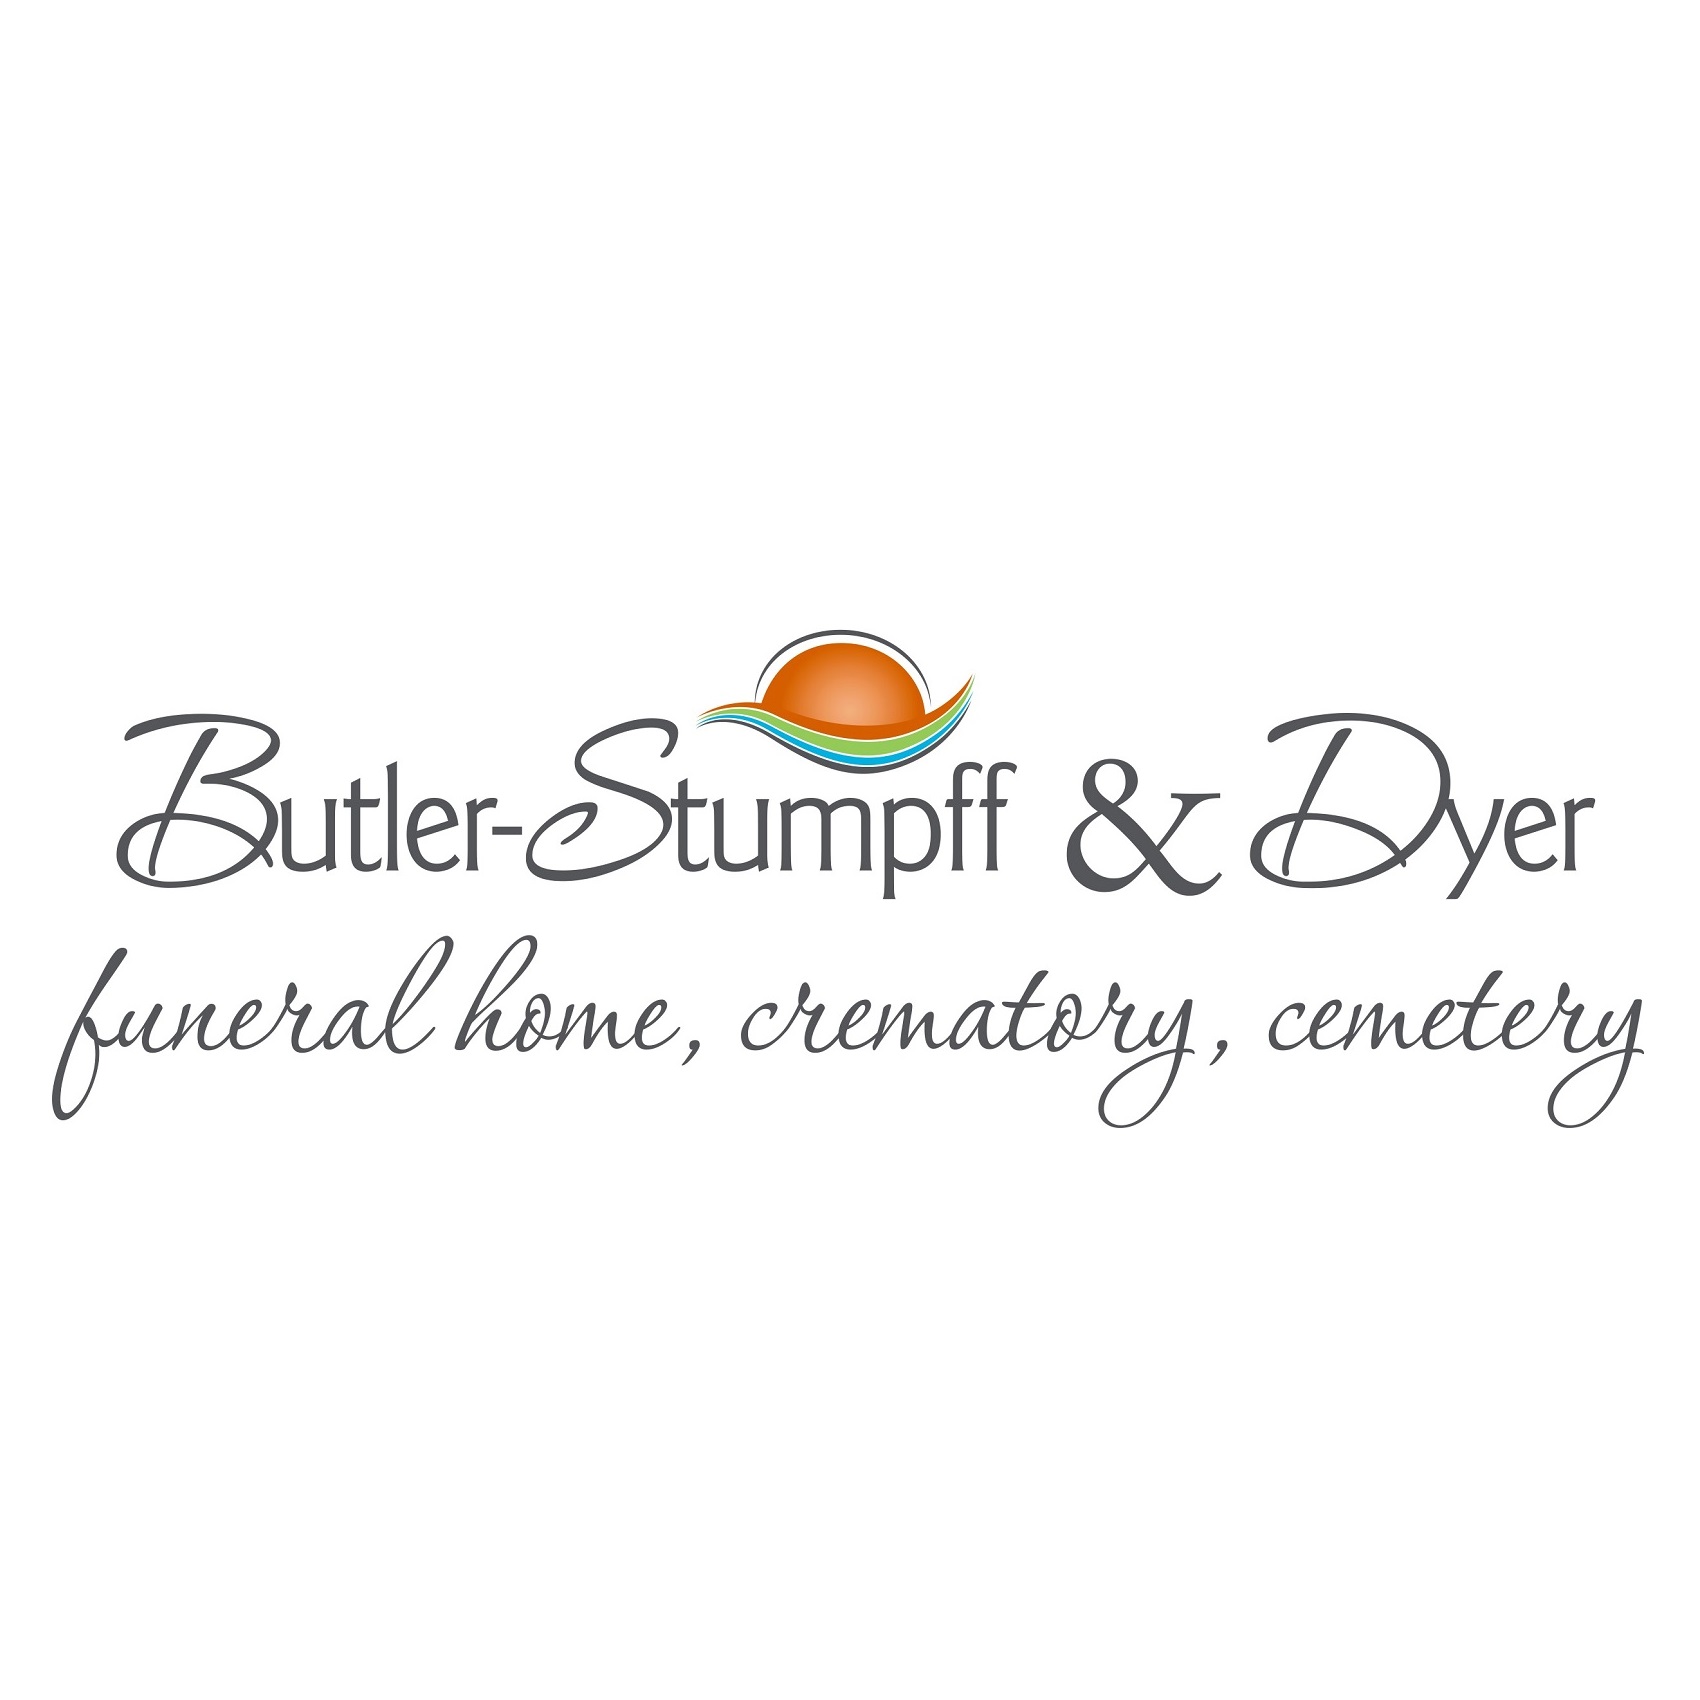 Butler-Stumpff & Dyer Funeral Home & Crematory | 2103 E 3rd St, Tulsa, OK 74104, United States | Phone: (918) 587-7000